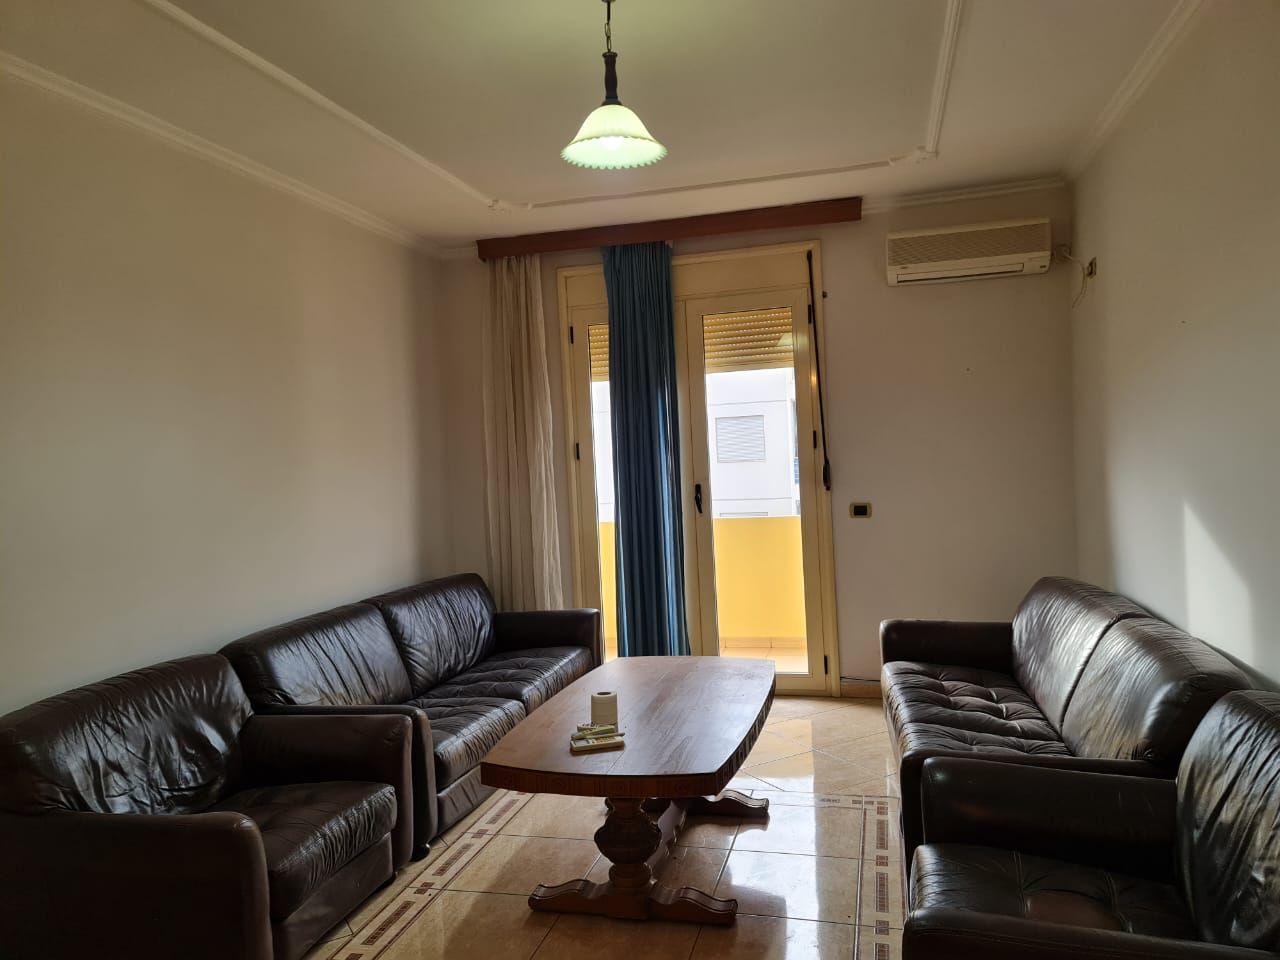 2 Bedroom Apartment In Vlore Albania For Sale 